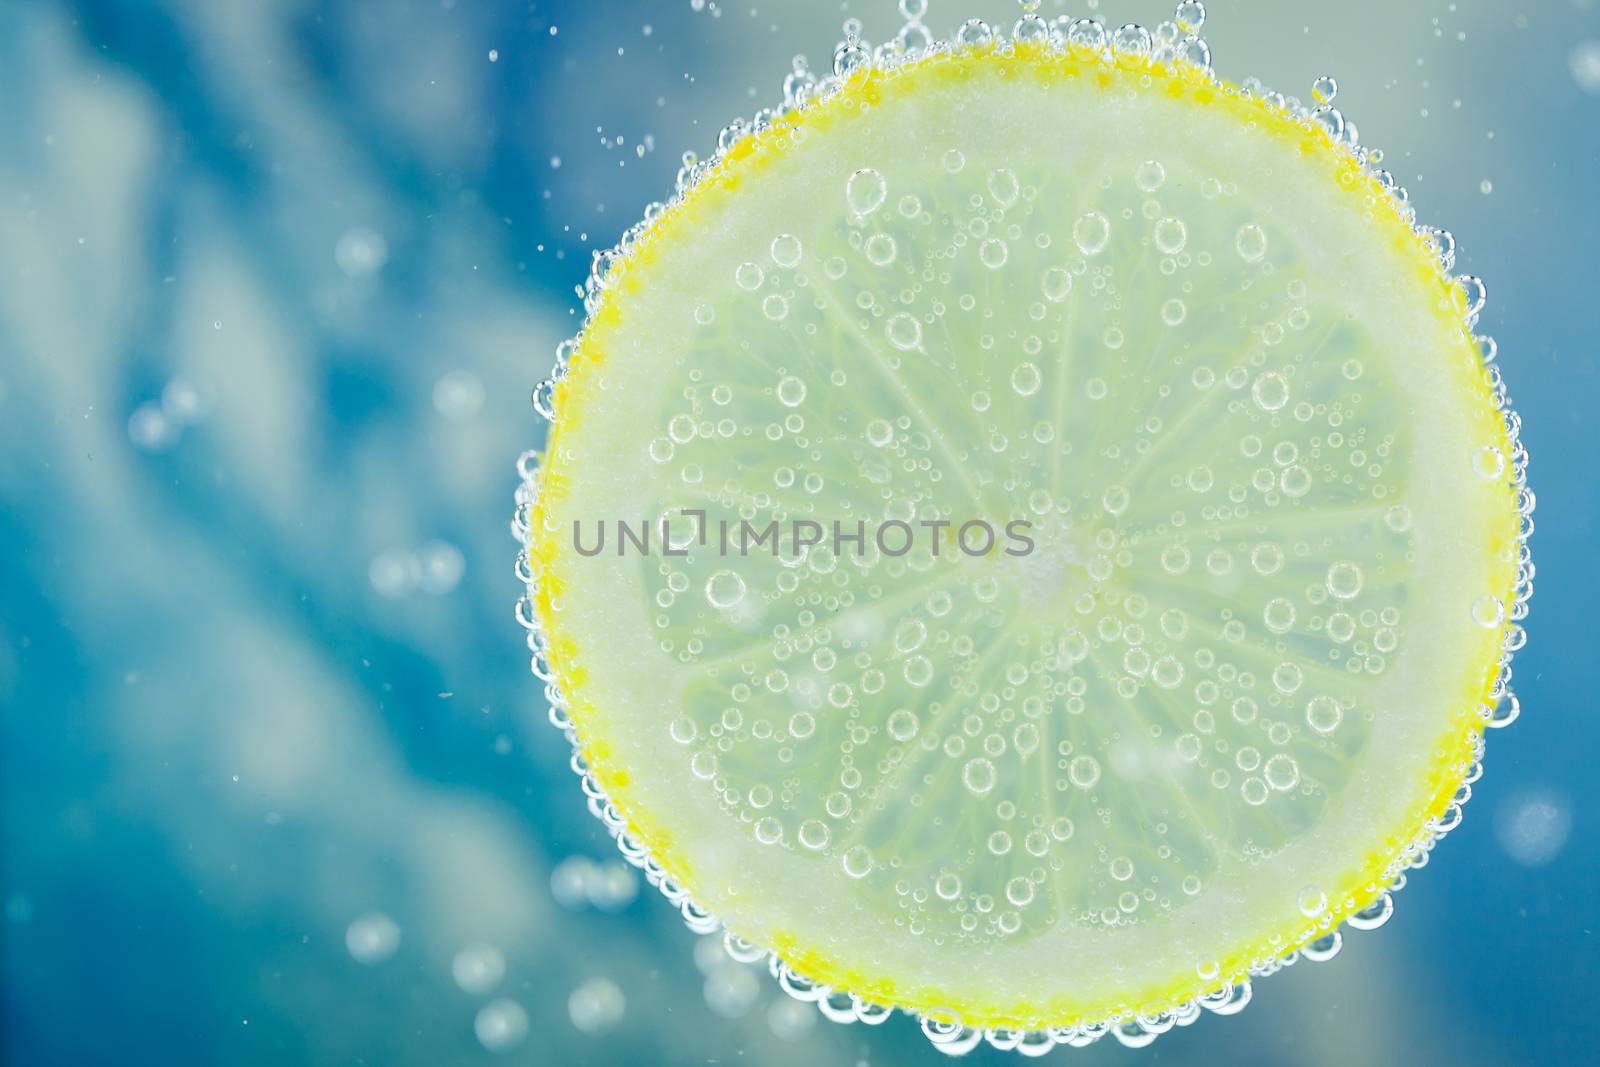 Vertical close-up of slice of lemon falling into carbonated water with bubbles, on blue background. Refresher drink concept